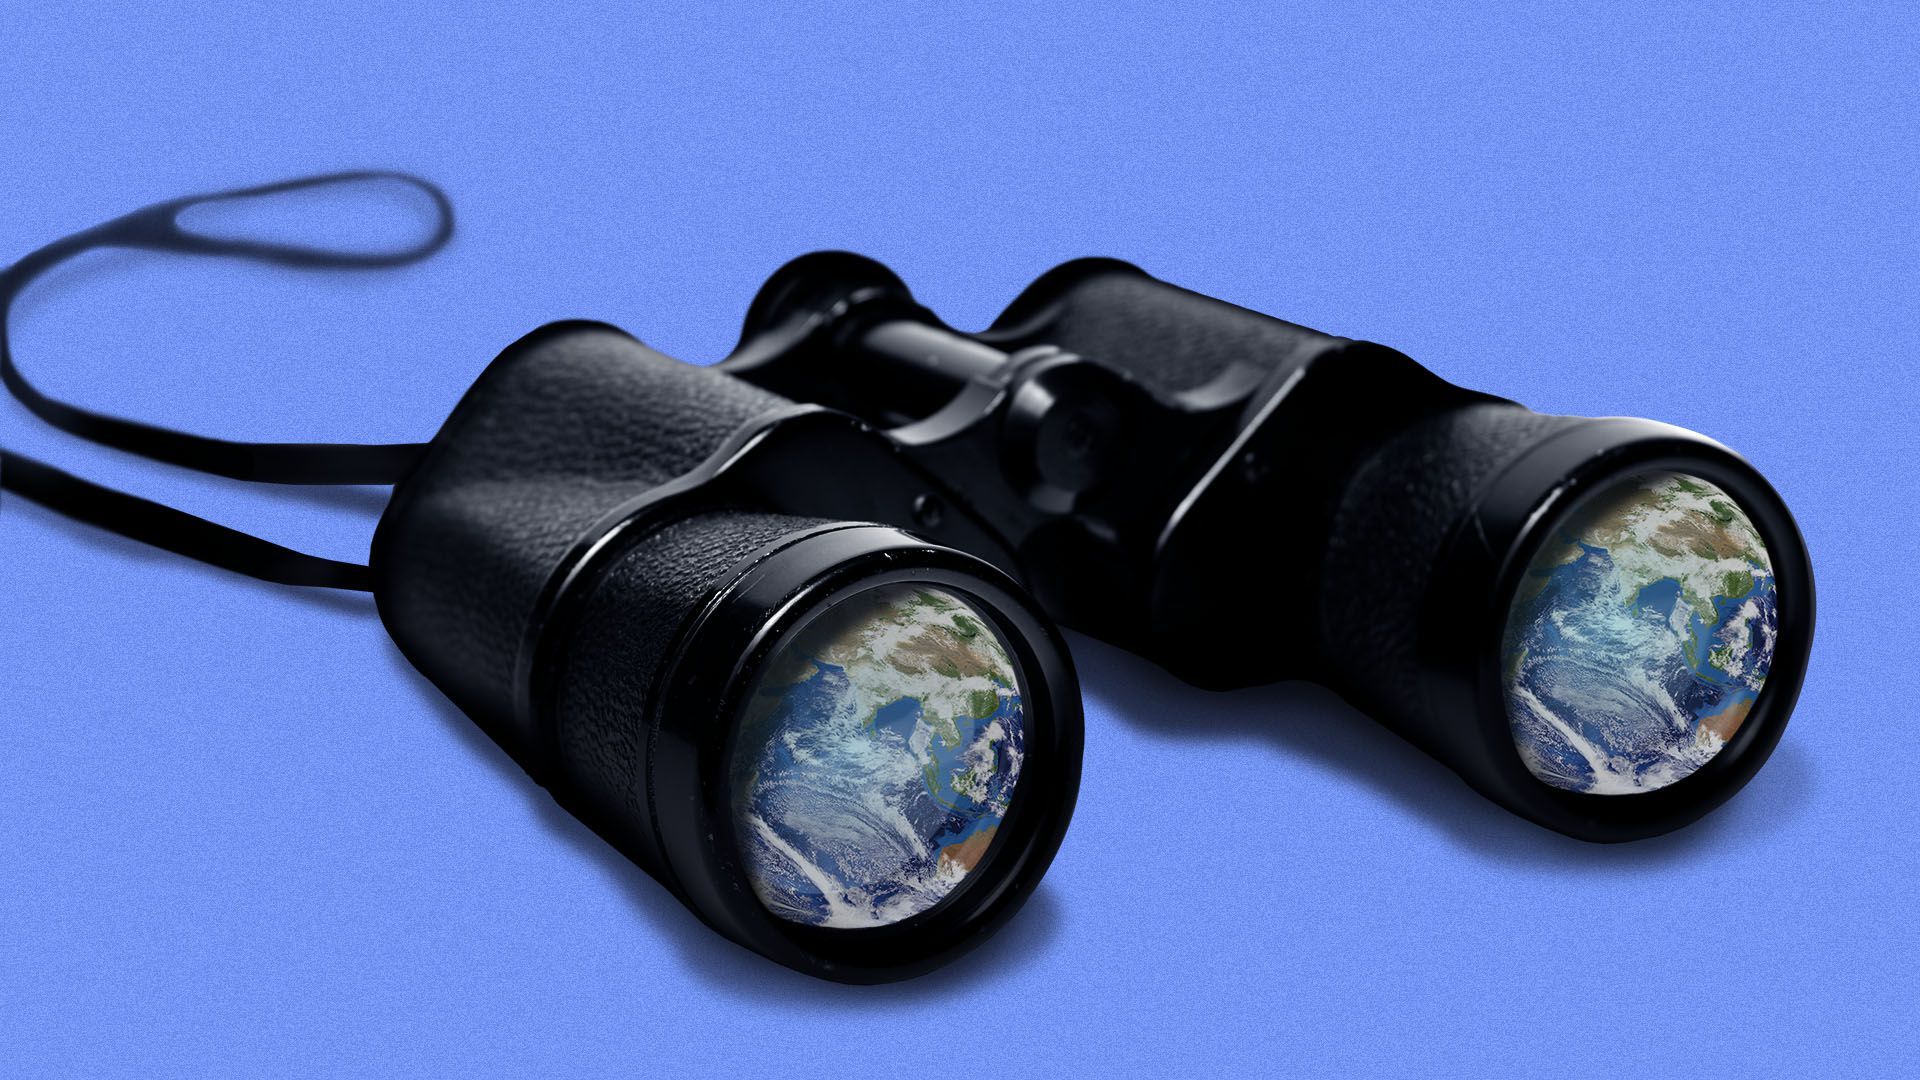 Illustration of a pair of binoculars with the earth reflected in the lenses